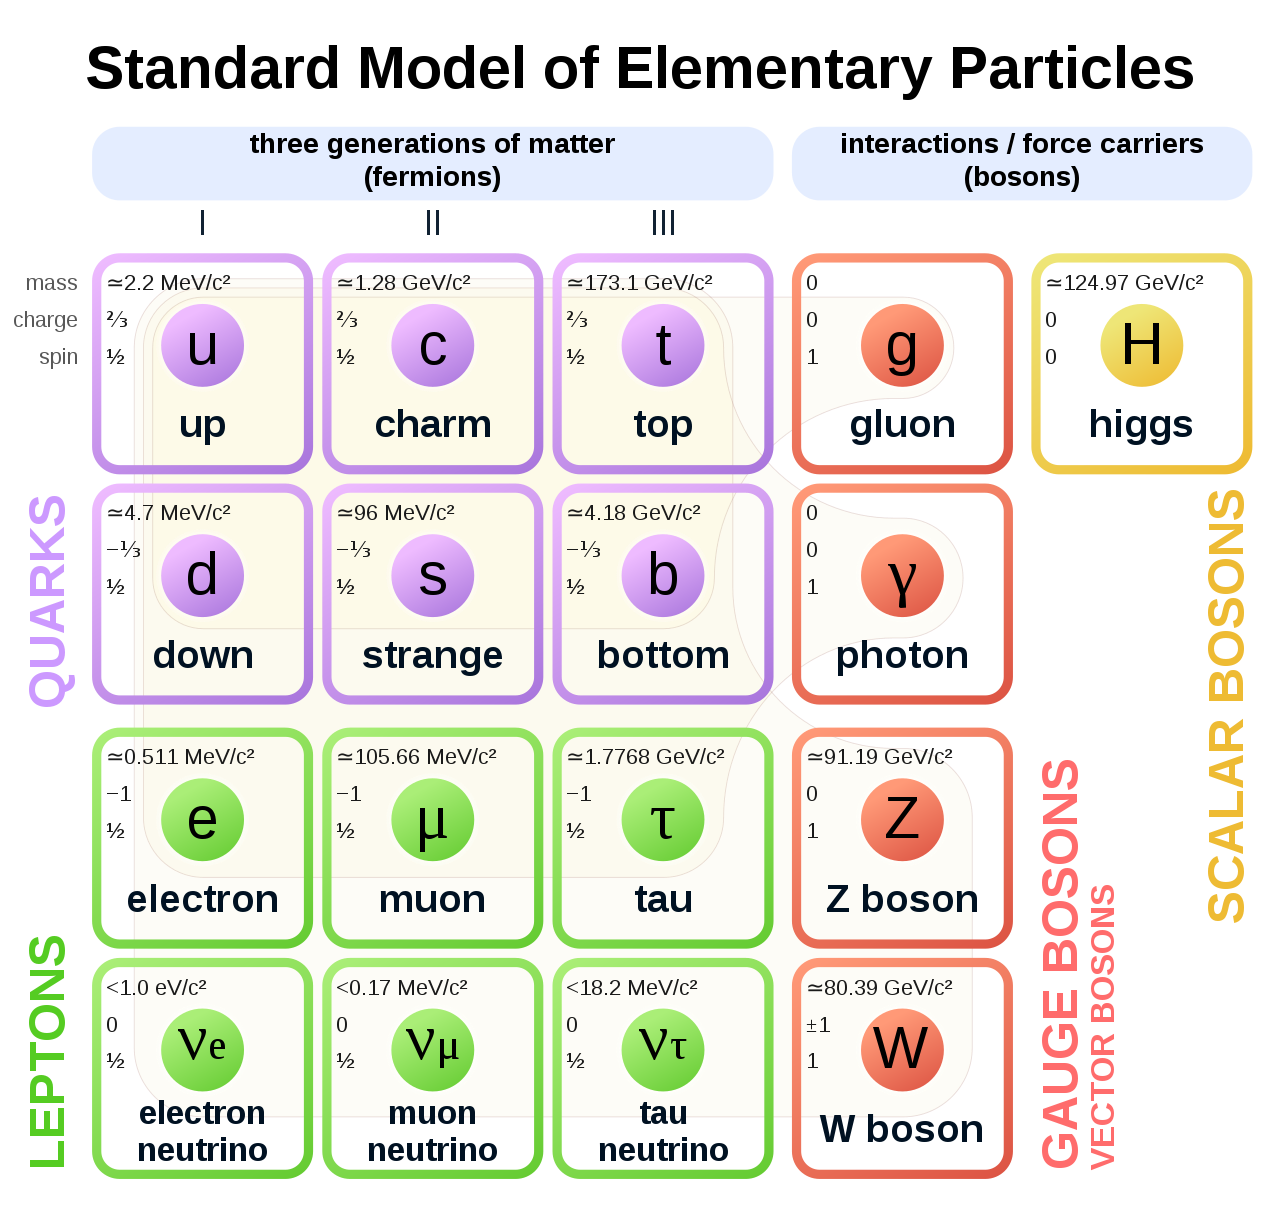 Periodic table of elementary particles including quarks, electron, muon, neutrino, photon, and higgs.